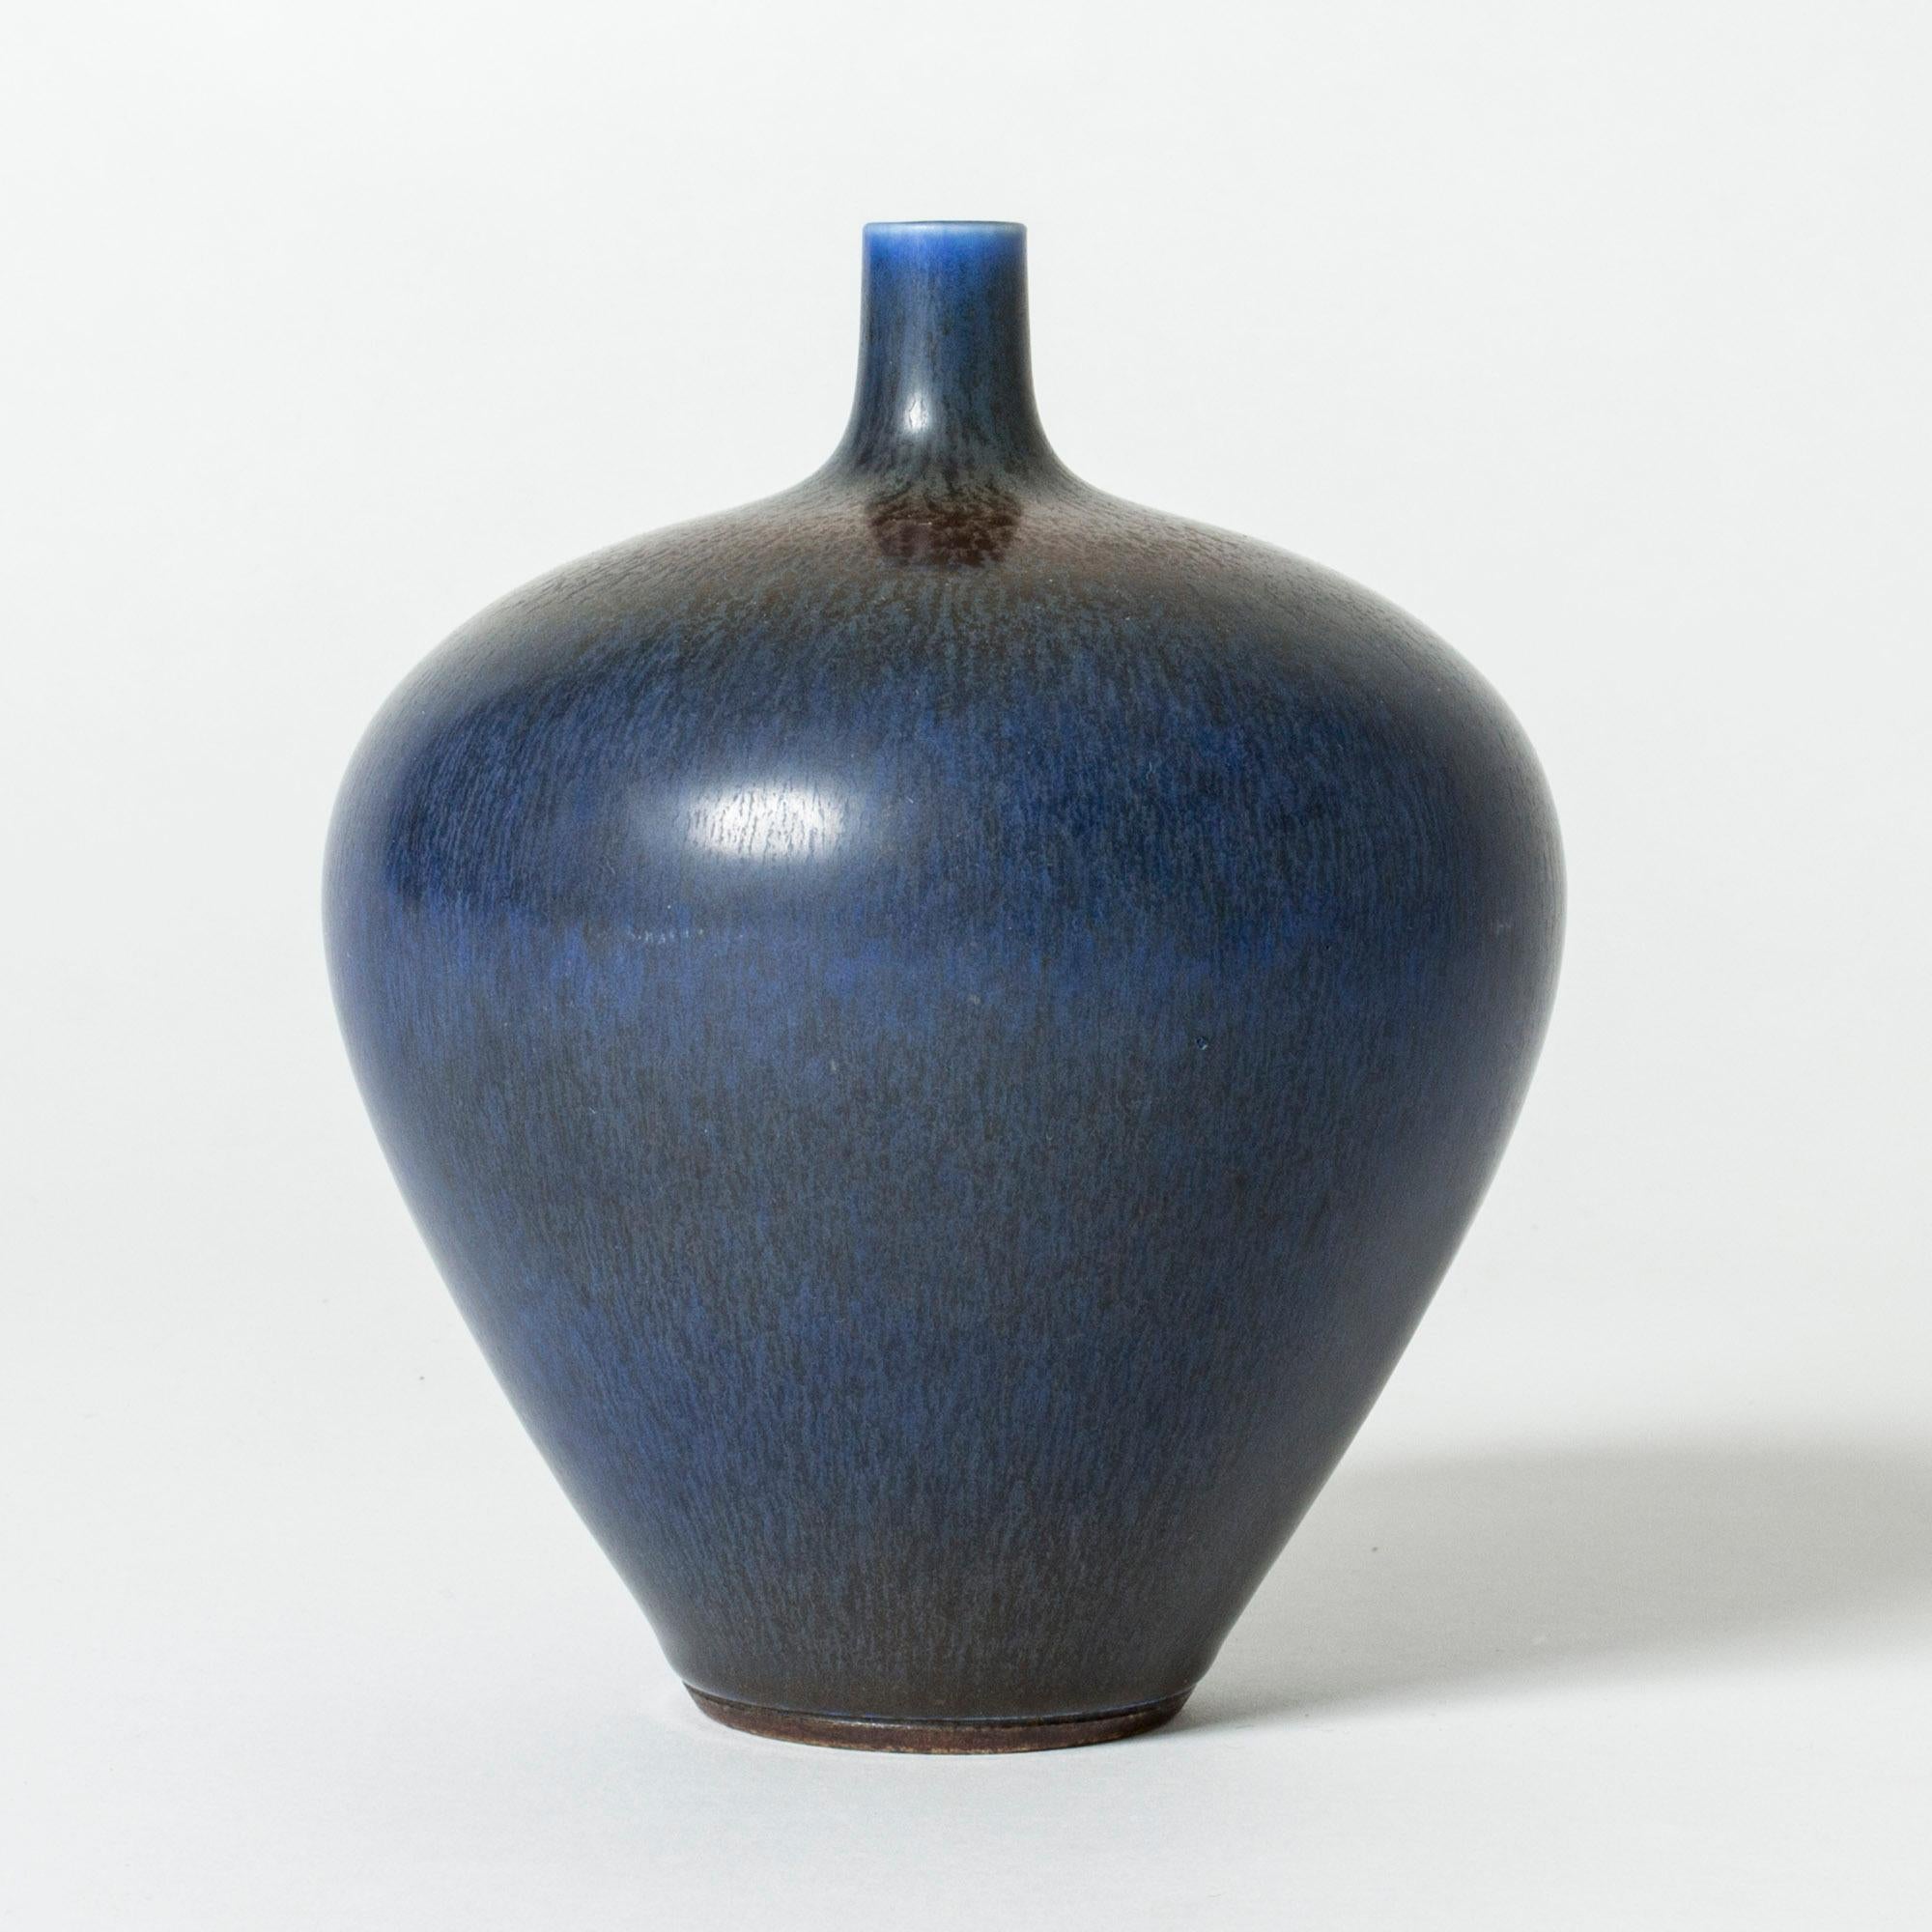 Beautiful stoneware vase by Berndt Friberg, in an elegant apple form. Hare’s fur glaze in nuances of blue.

Berndt Friberg was a Swedish ceramicist, renowned for his stoneware vases and vessels for Gustavsberg. His pure, composed designs with